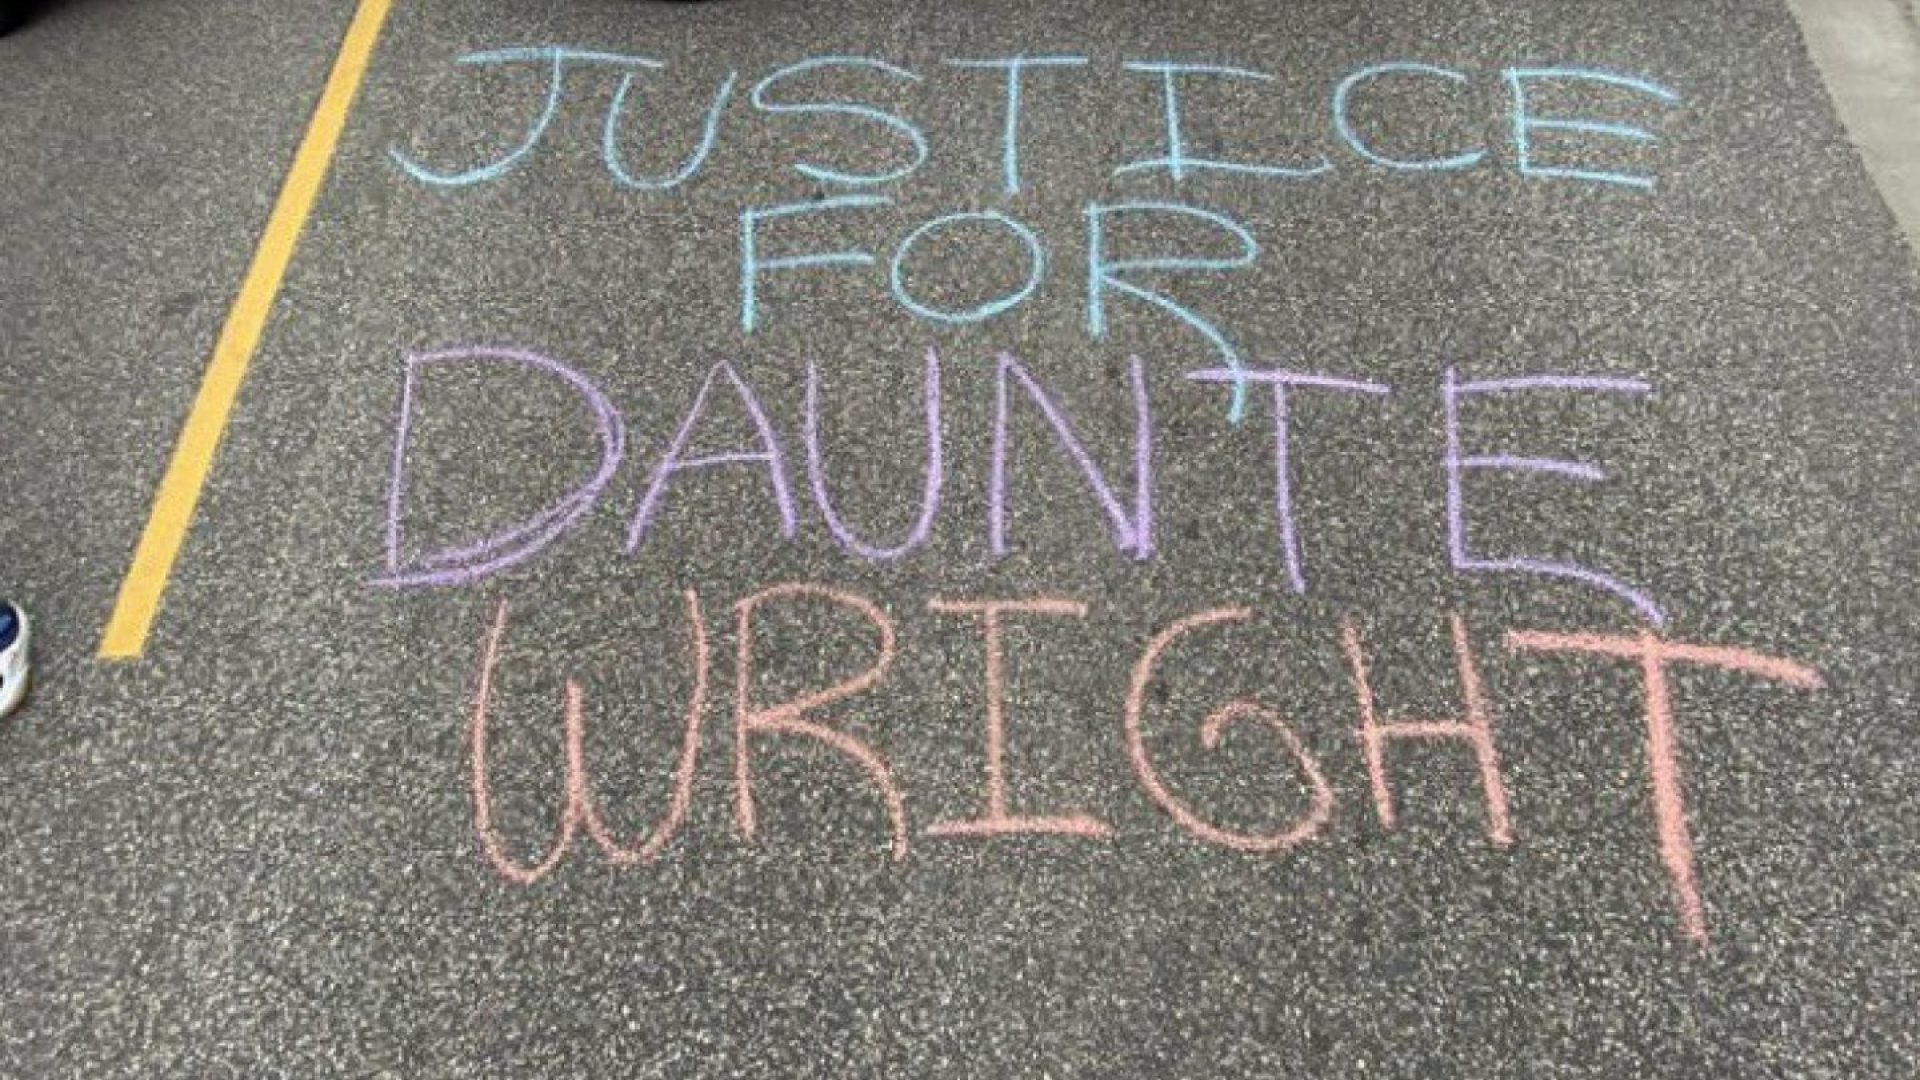 What We Know About Daunte Wright's Fatal Traffic Stop